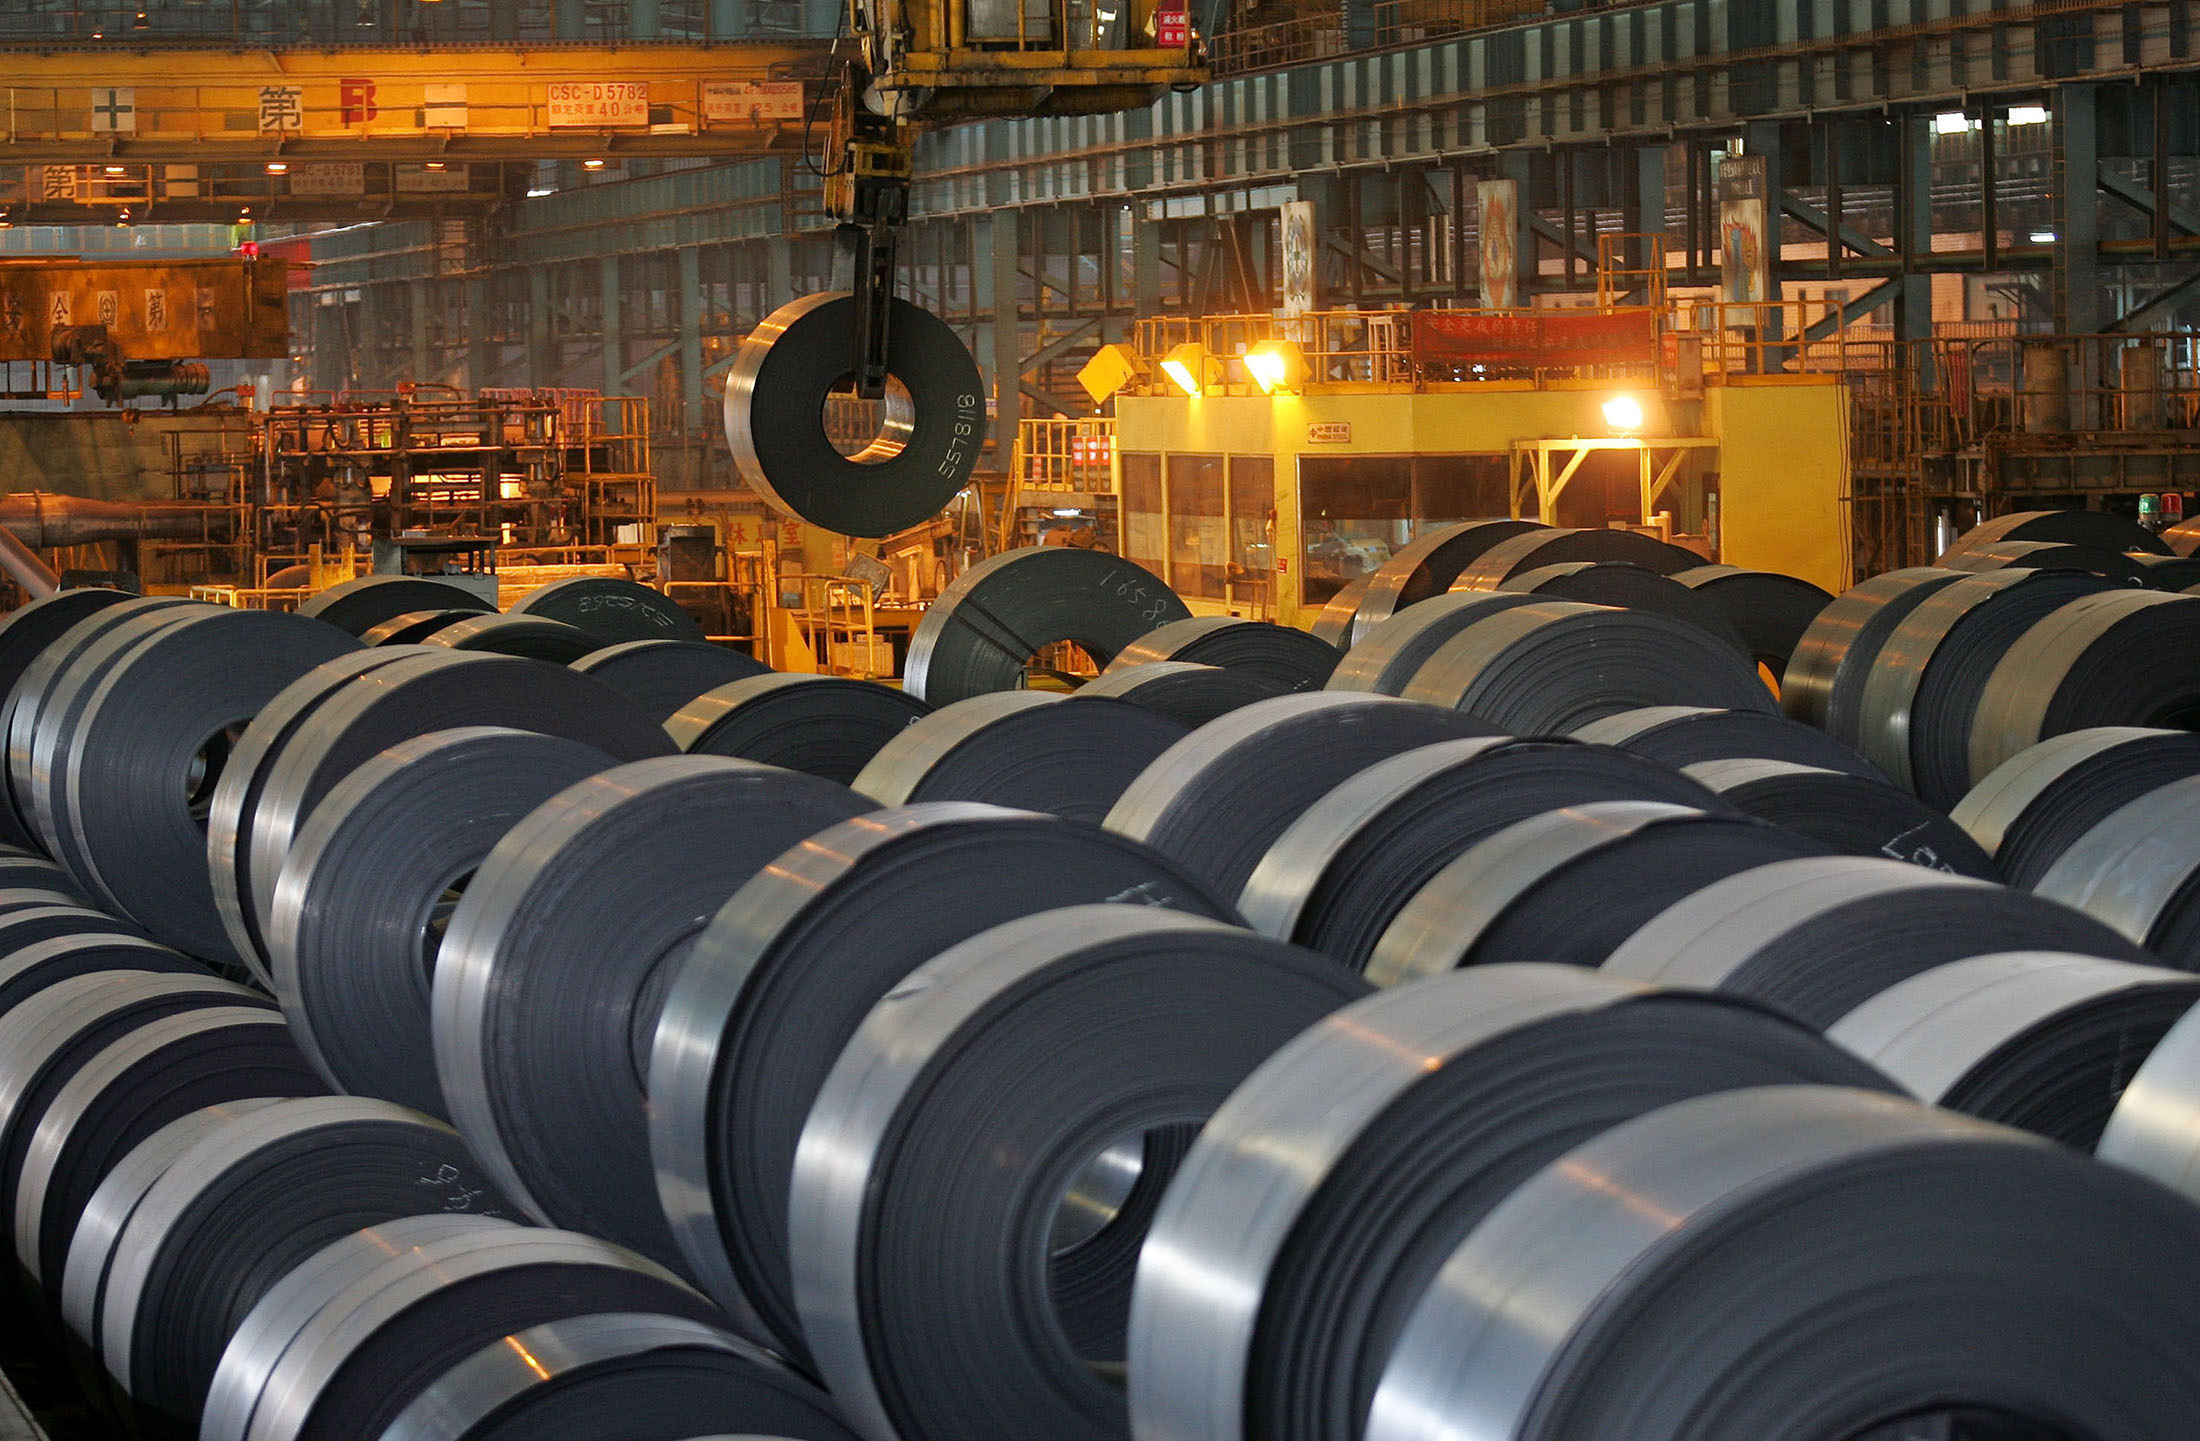 China Lowers Import Duty on Steel Products